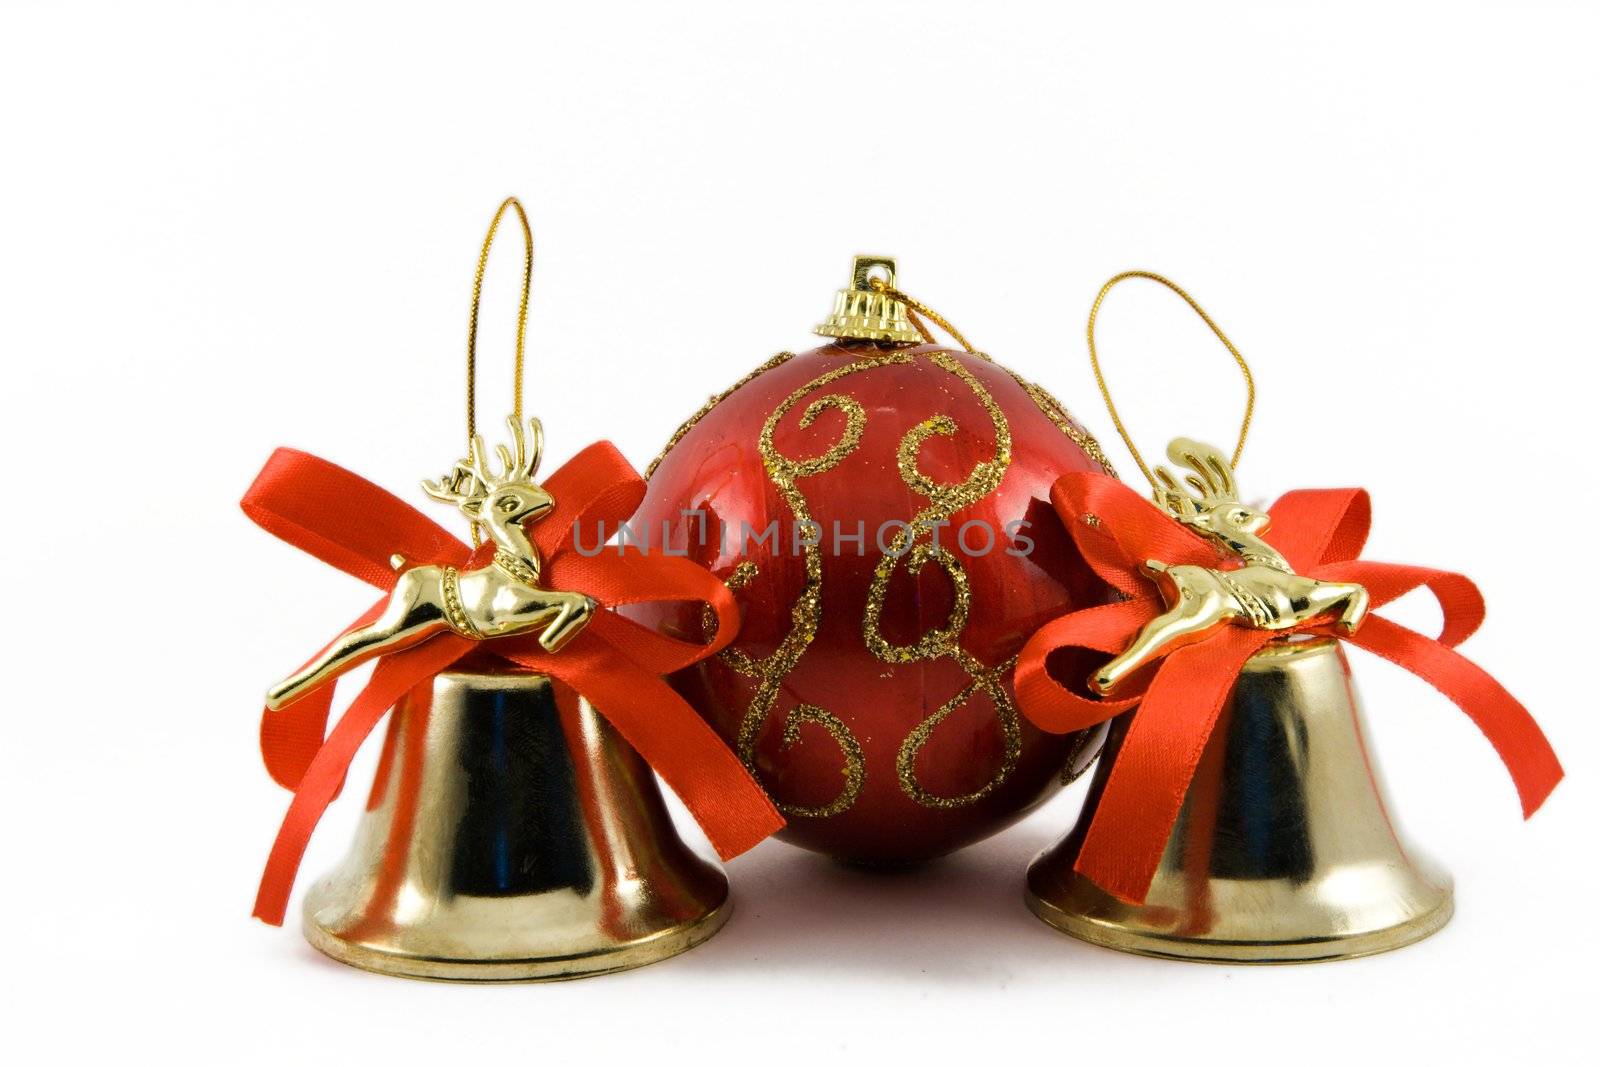 Two handbells and sphere on a white background